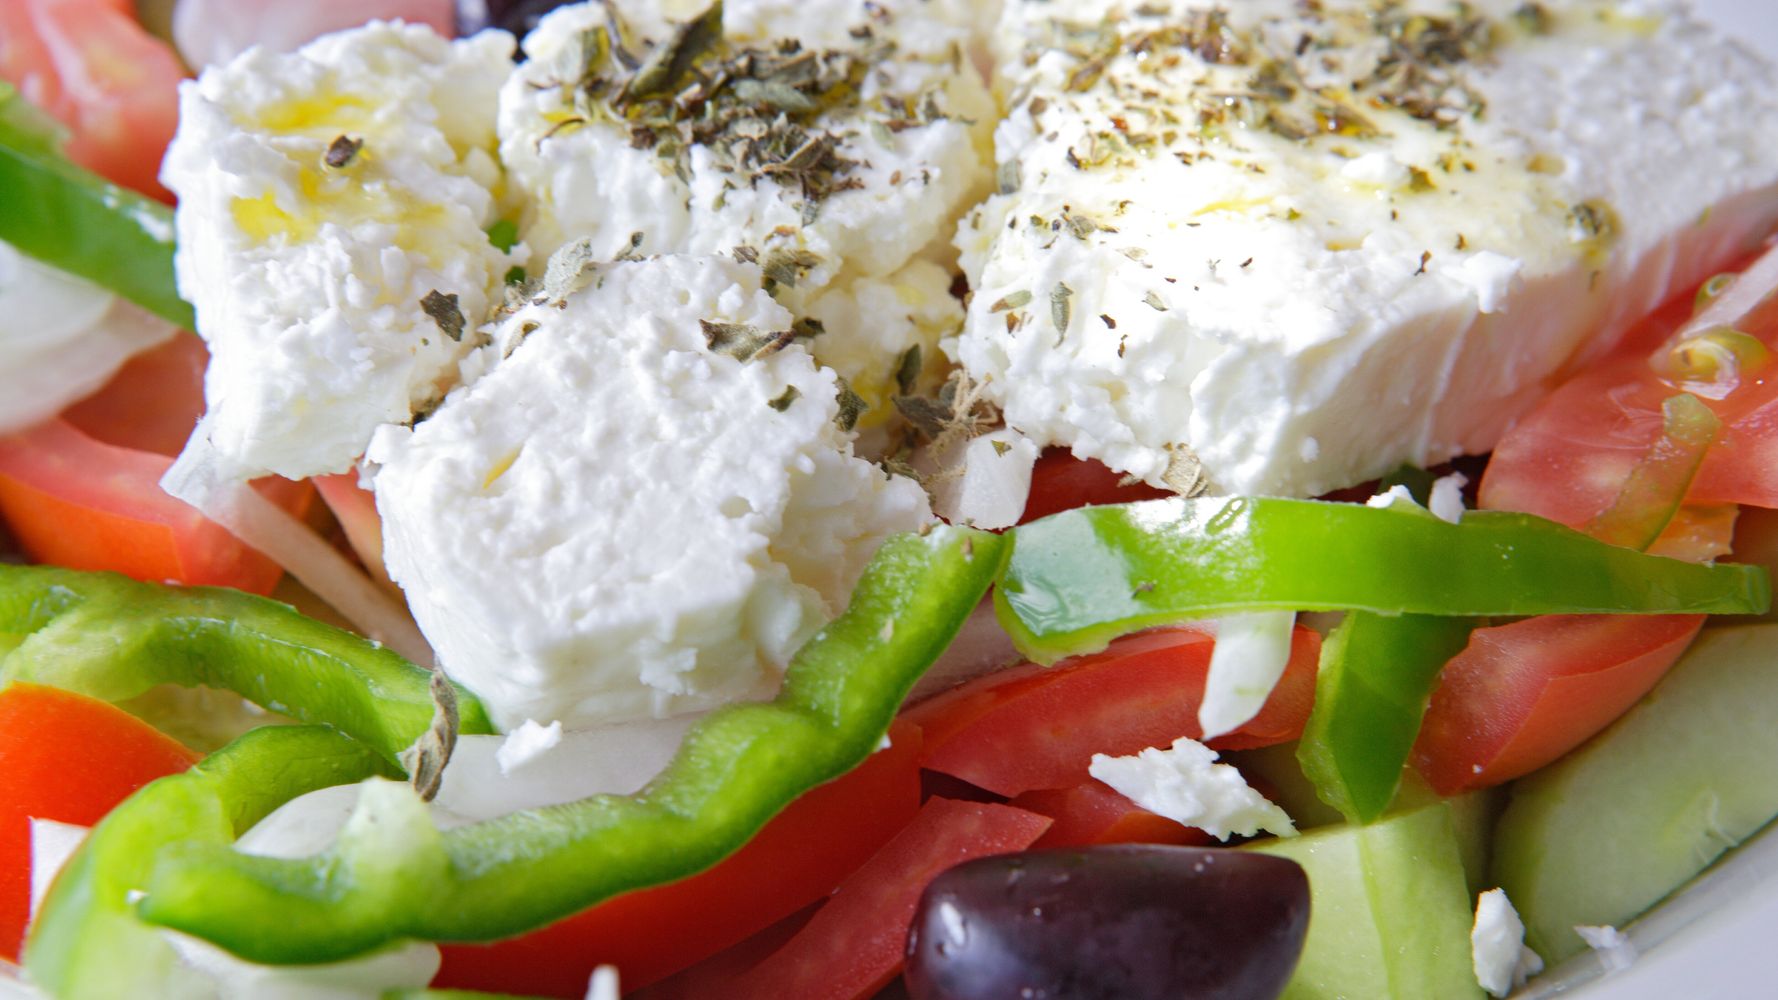 There Are 3 Different Types Of Feta Cheese. Here's How To Use Them